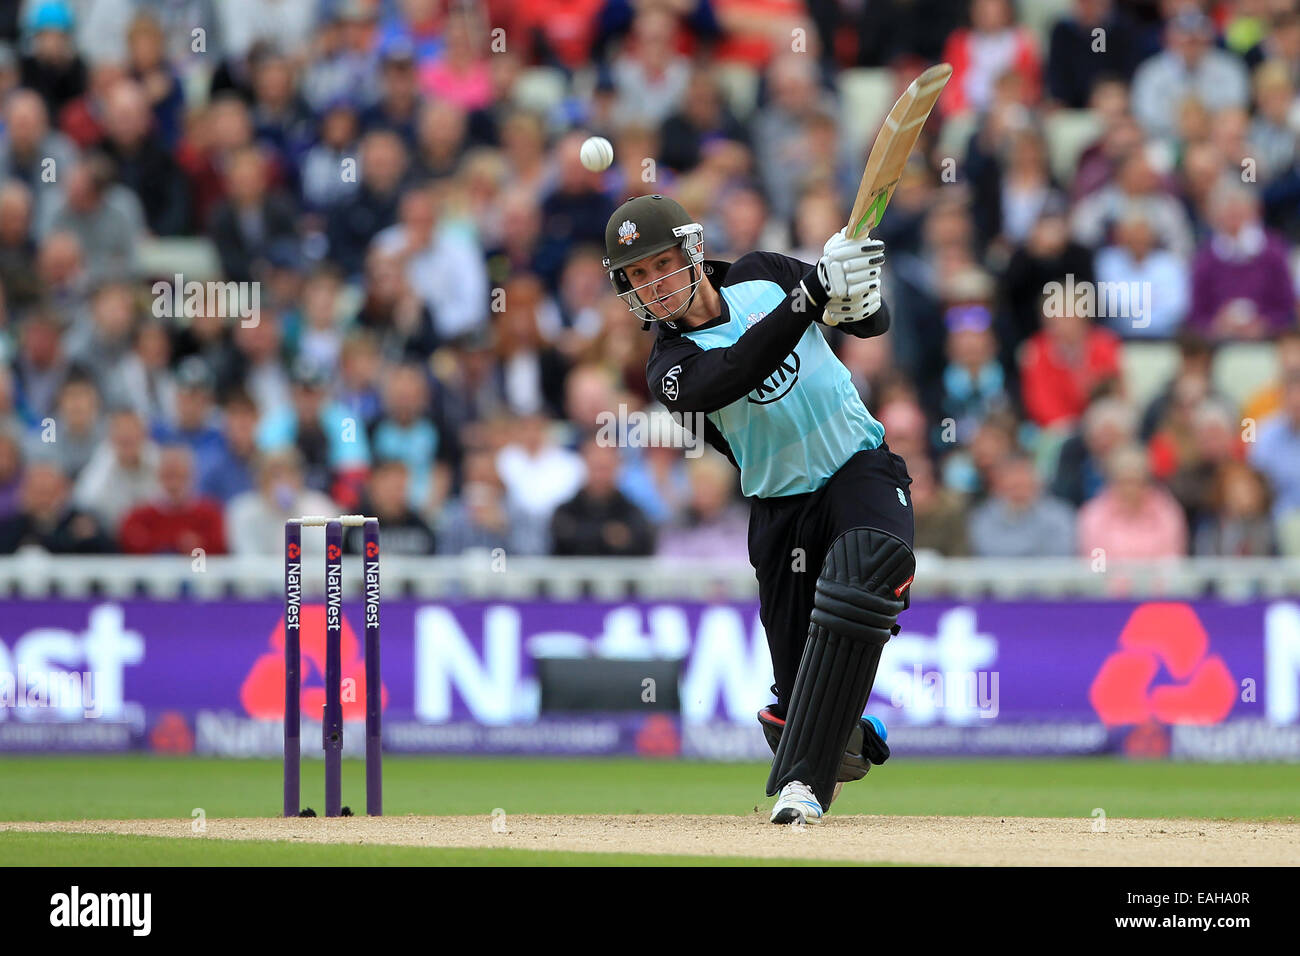 Cricket - Jason Roy of Surrey CCC bats during the NatWest T20 Blast first semi final match at Edgbaston in 2014 Stock Photo